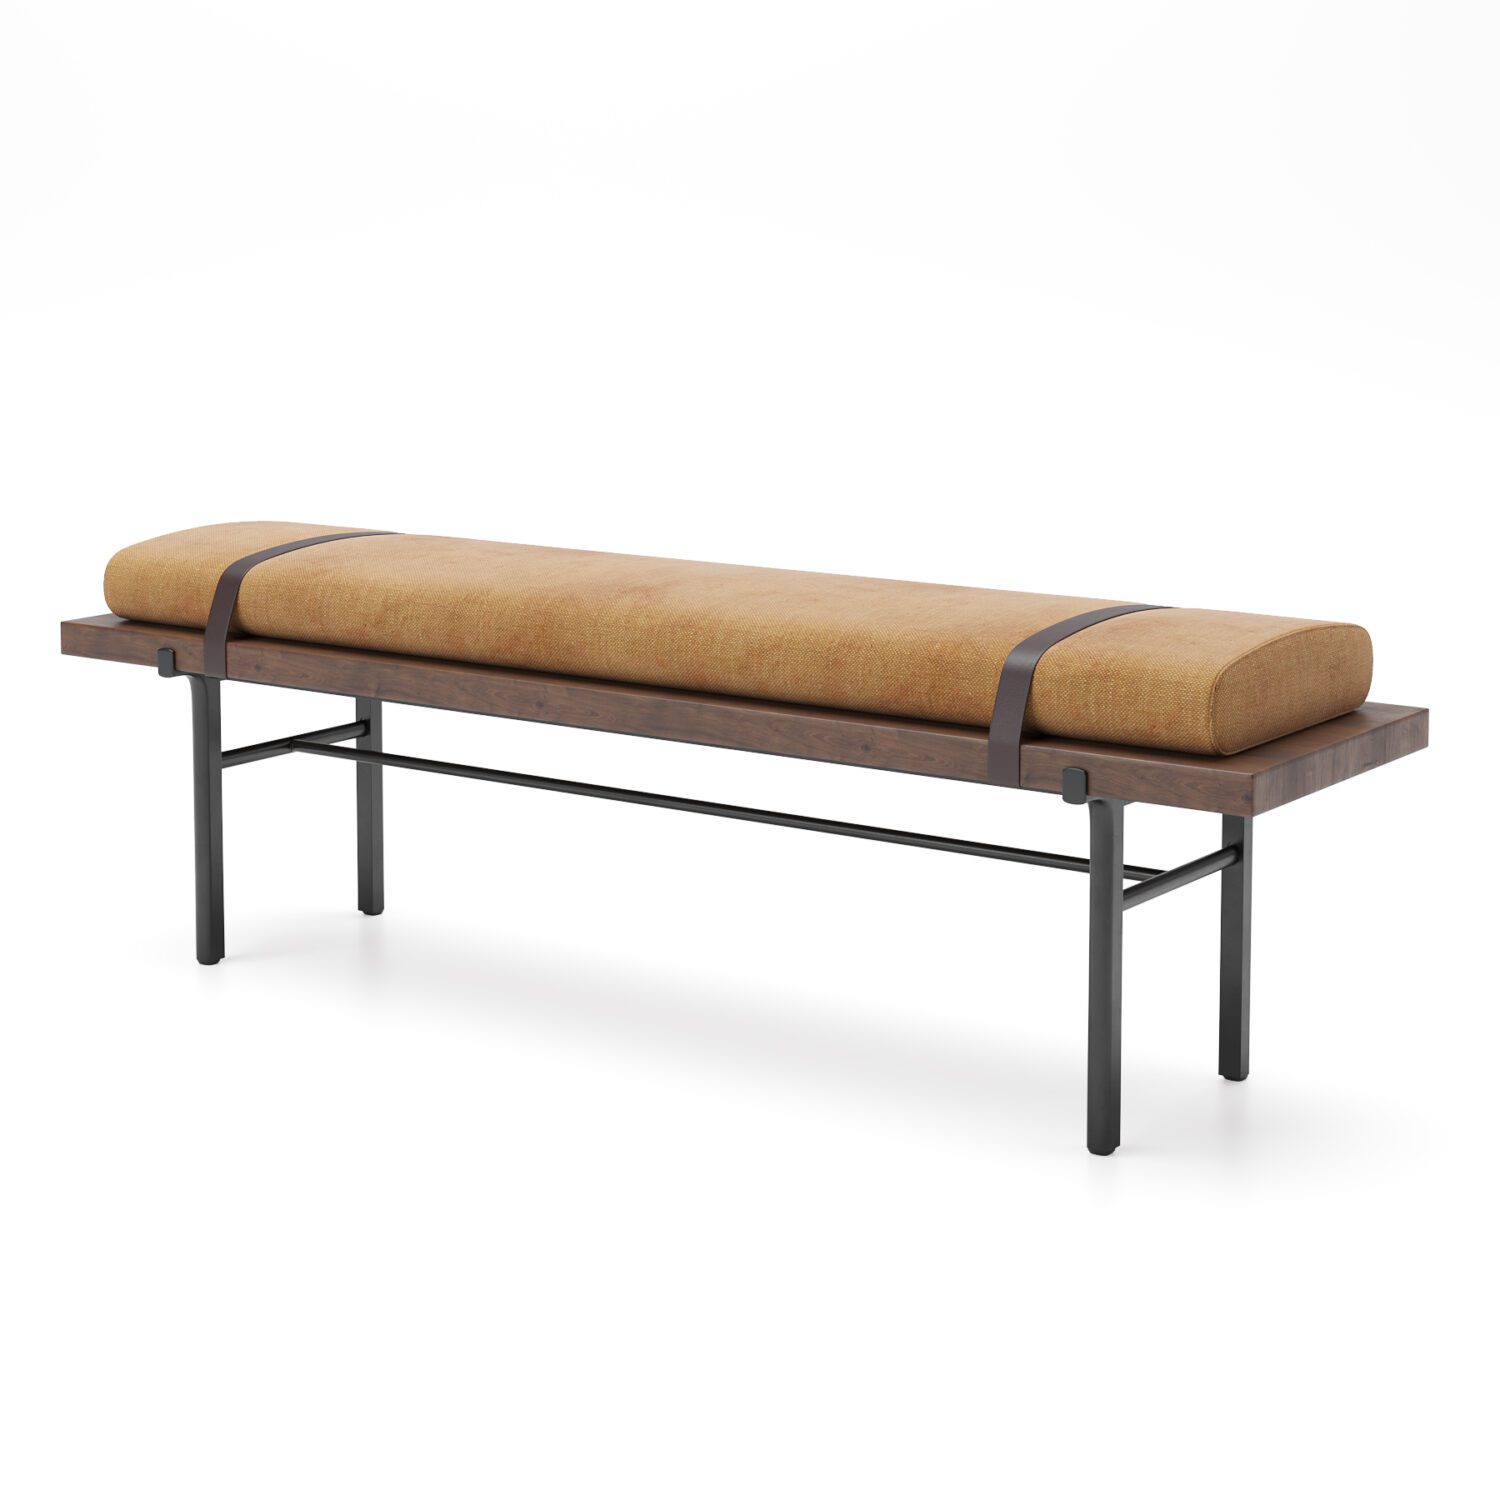 11135. Download Free 3D Bench Model by Giang Hoang